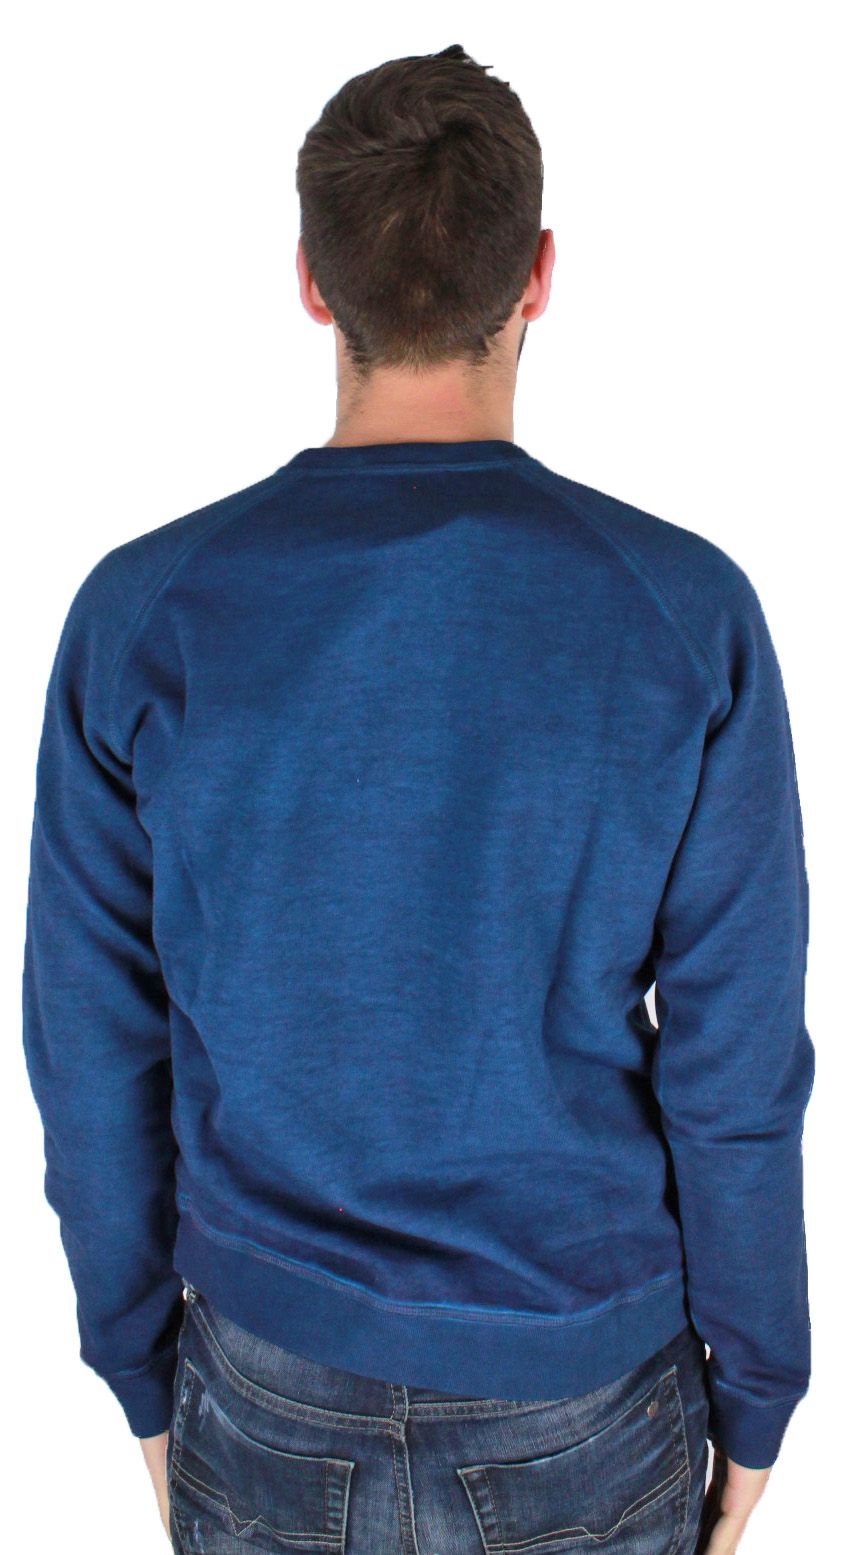 DSquared2 S74GU0139 505 Jumper. DSquared2 Blue Jumper. 100% Cotton. Made in Italy. DSquared2 Branding on Front of Jumper. RRP �245